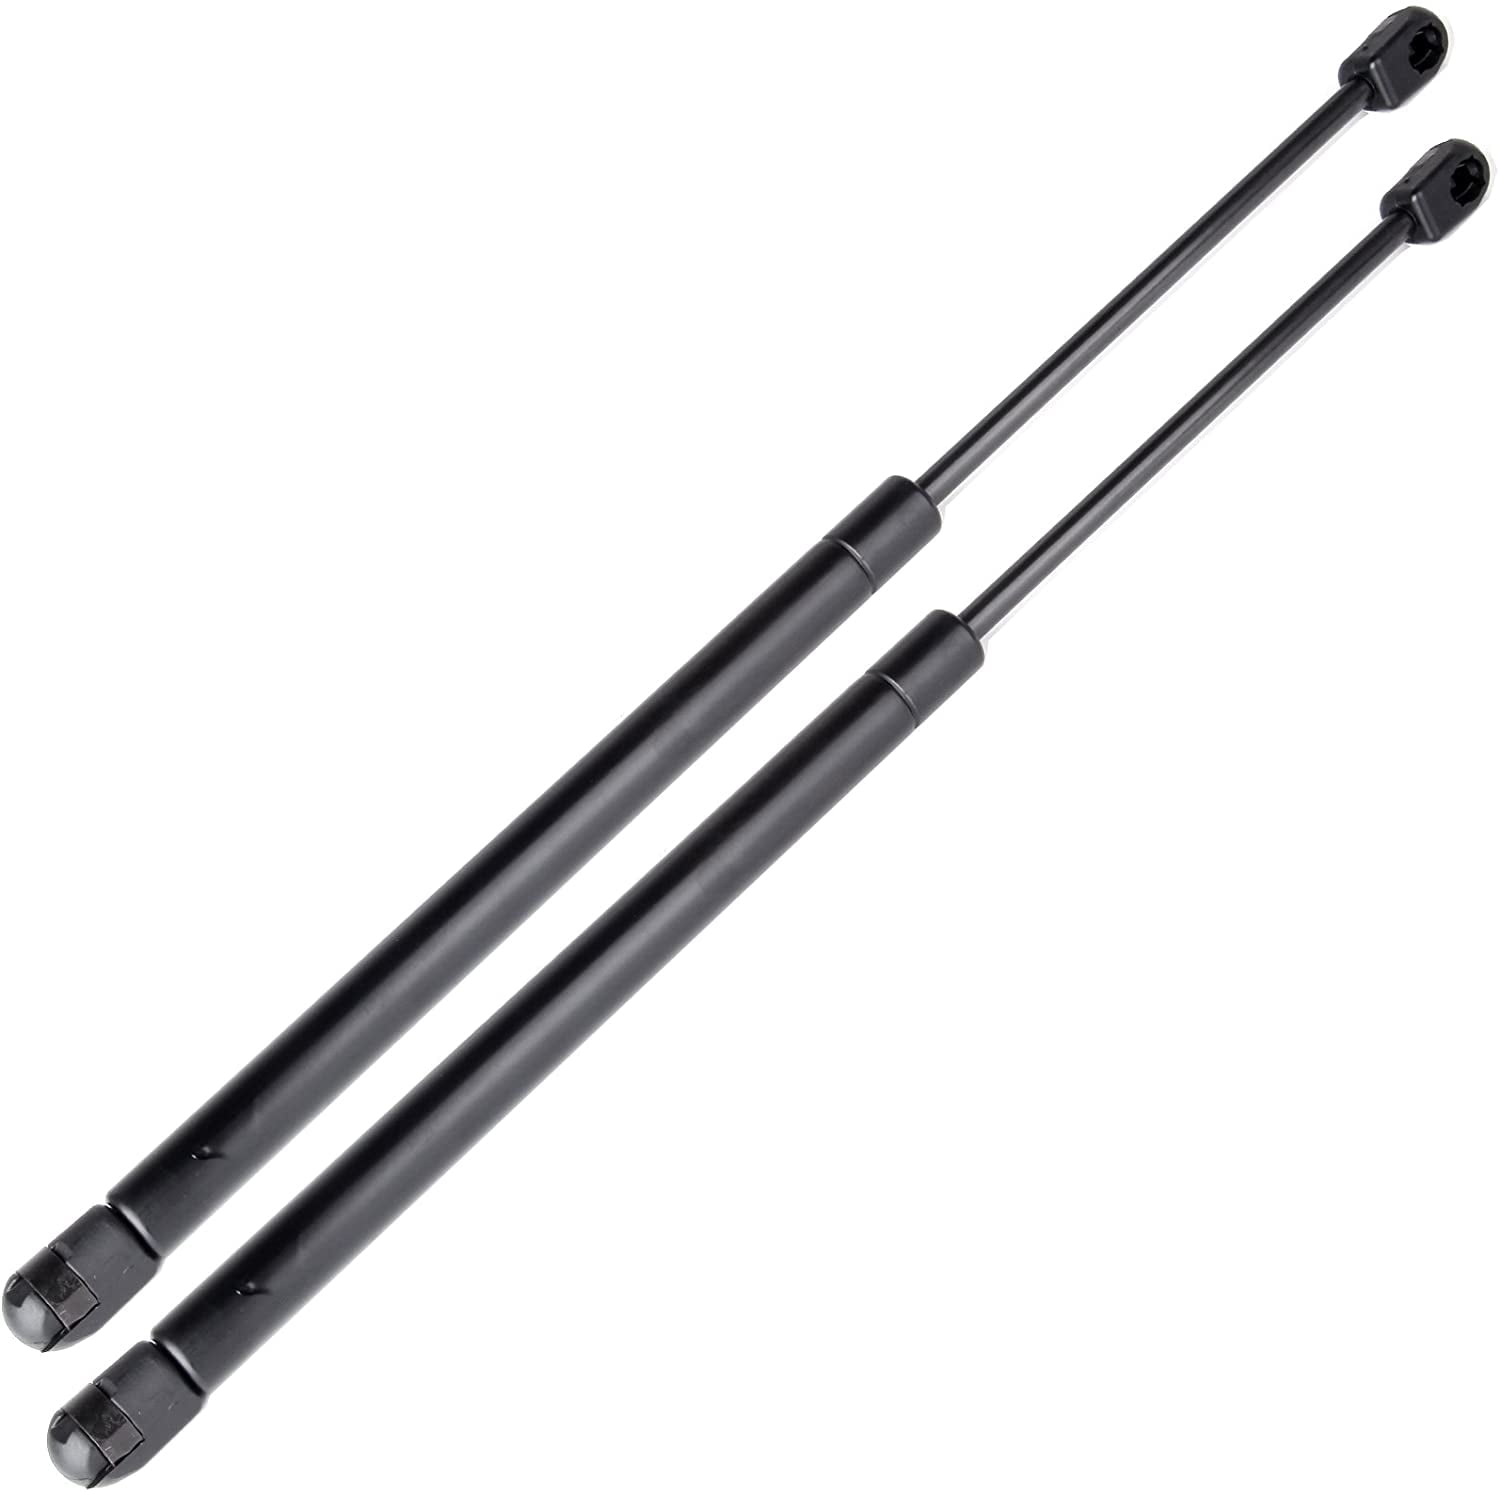 2 Front Hood Lift Supports Struts Struts Gas Springs For 2002-2007 Jeep Liberty 